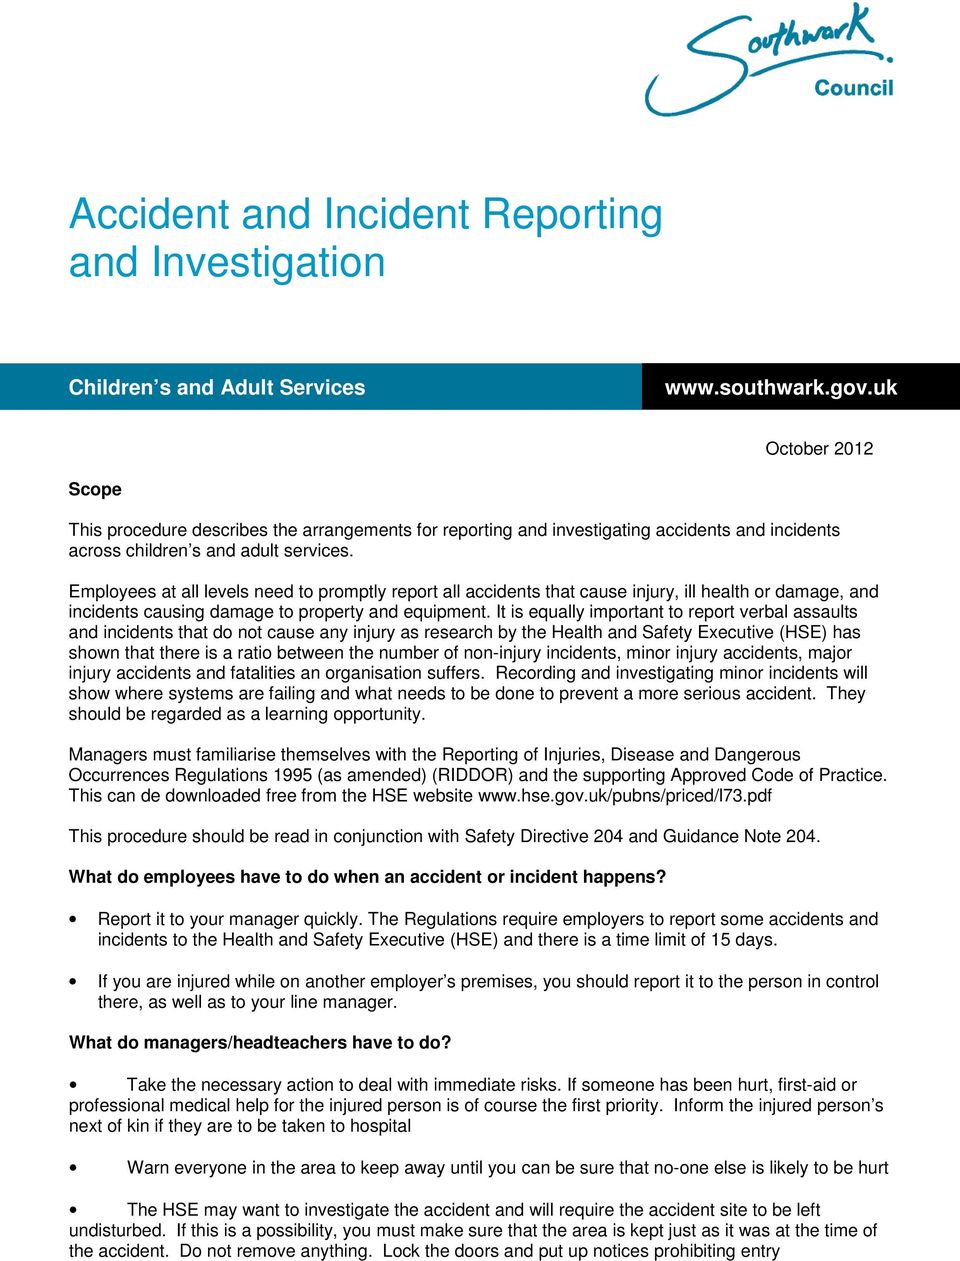 Employees at all levels need to promptly report all accidents that cause injury, ill health or damage, and incidents causing damage to property and equipment.